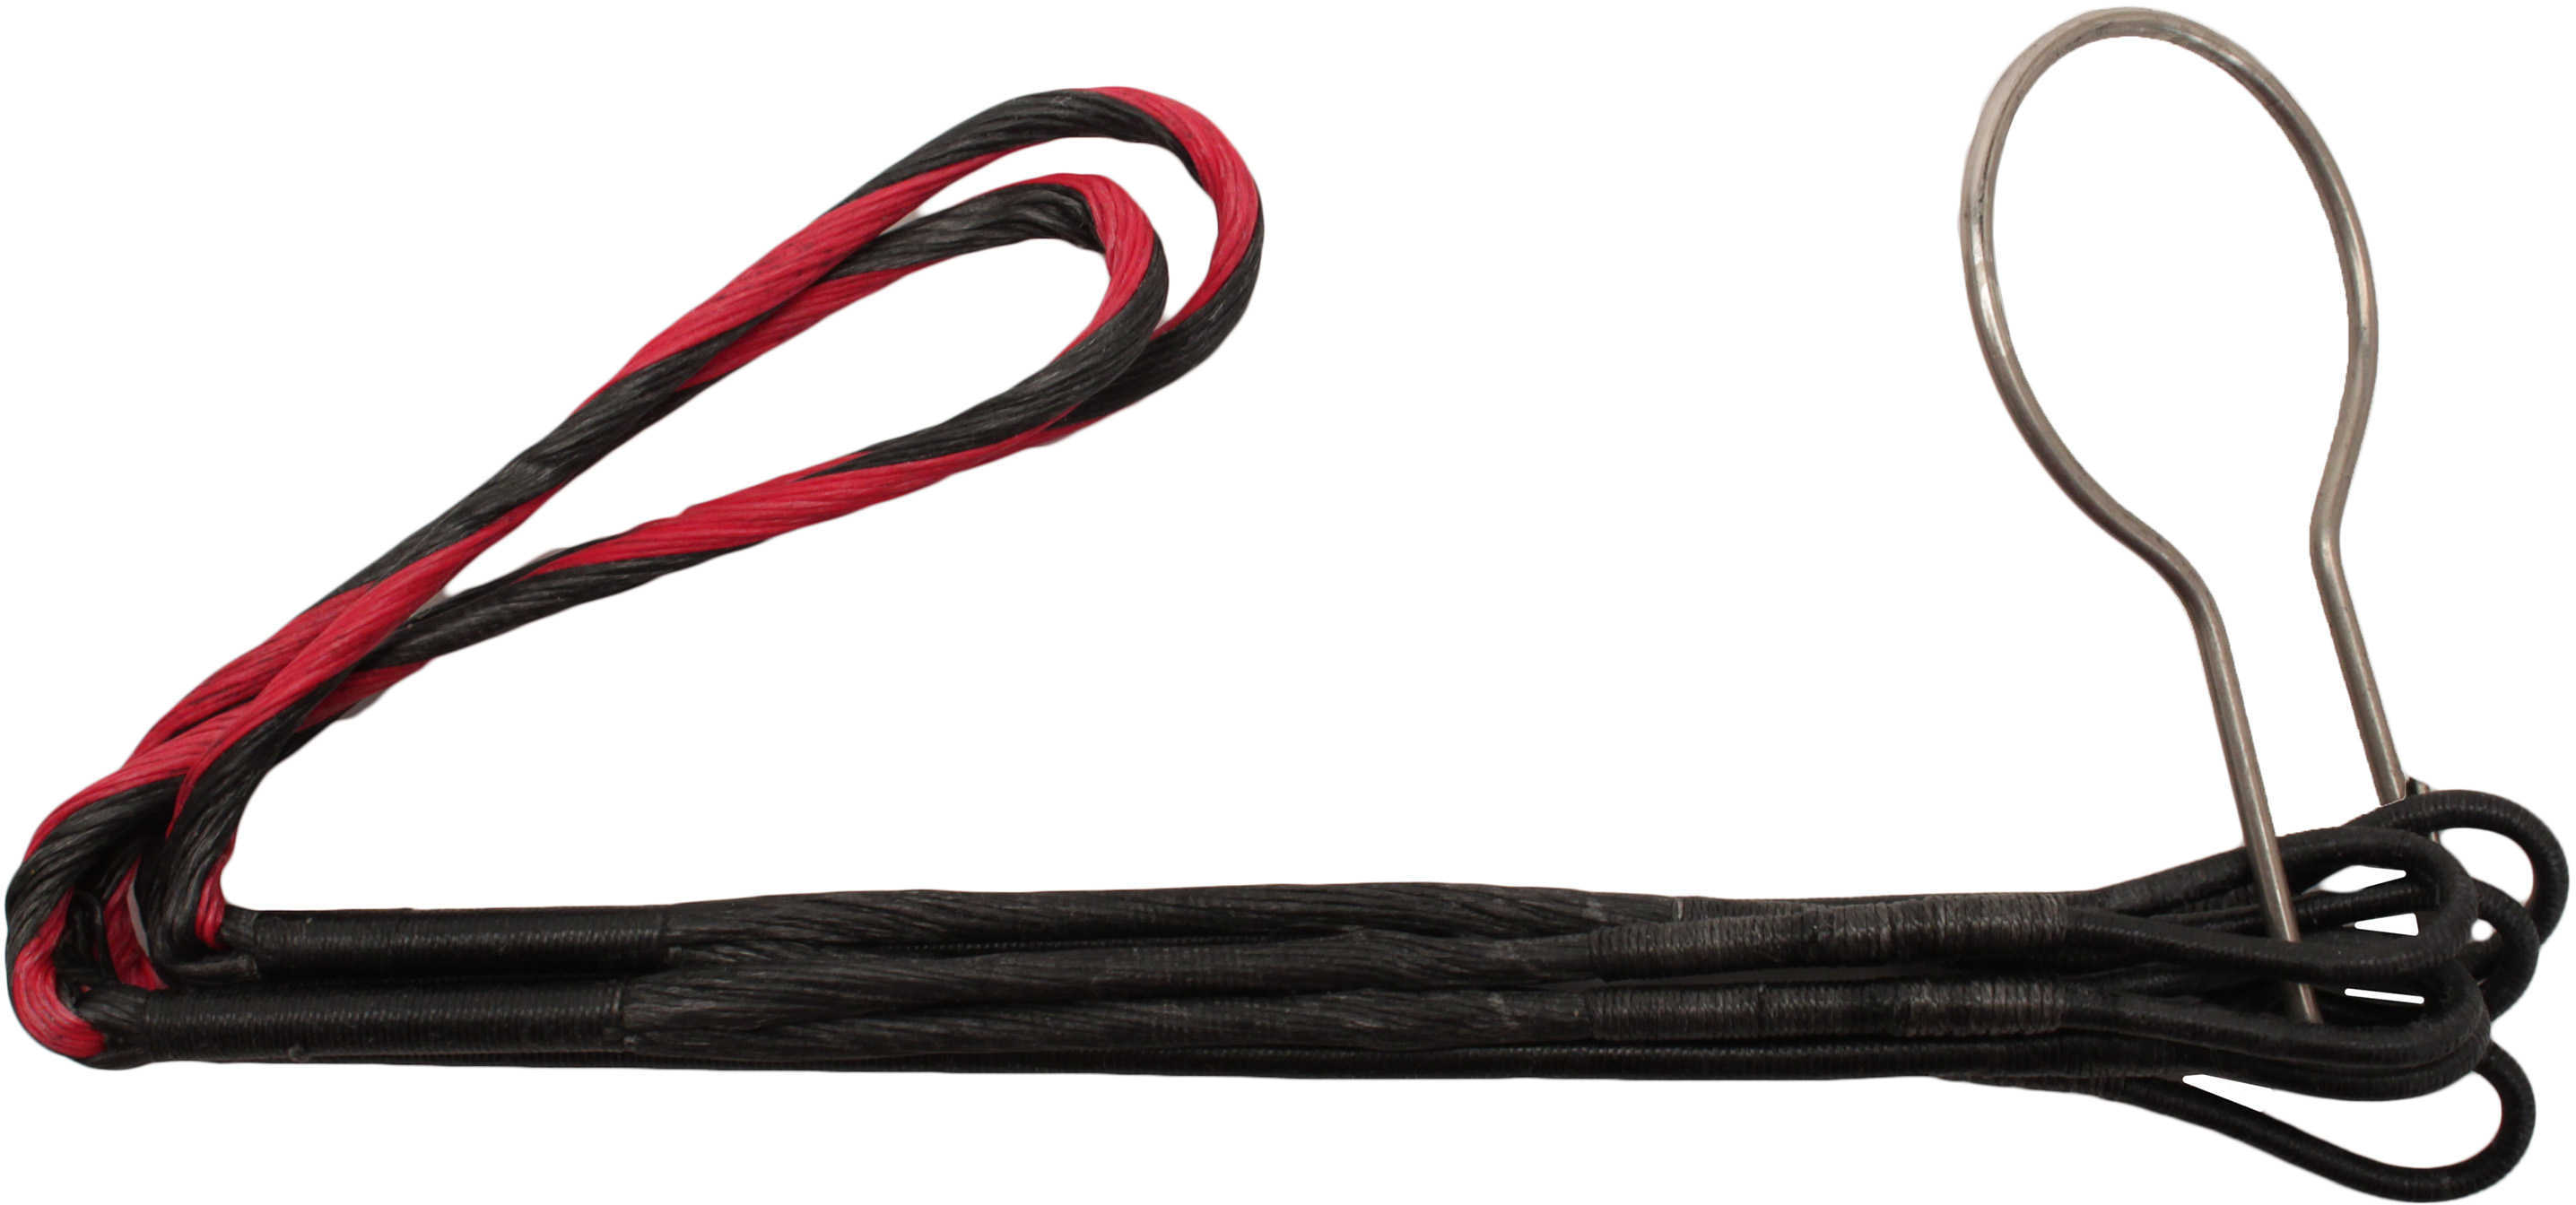 TenPoint Crossbow Technologies Point Replacement Cables Shadow Ulra-Lite Tactical XLT Md: HCA-12912-R